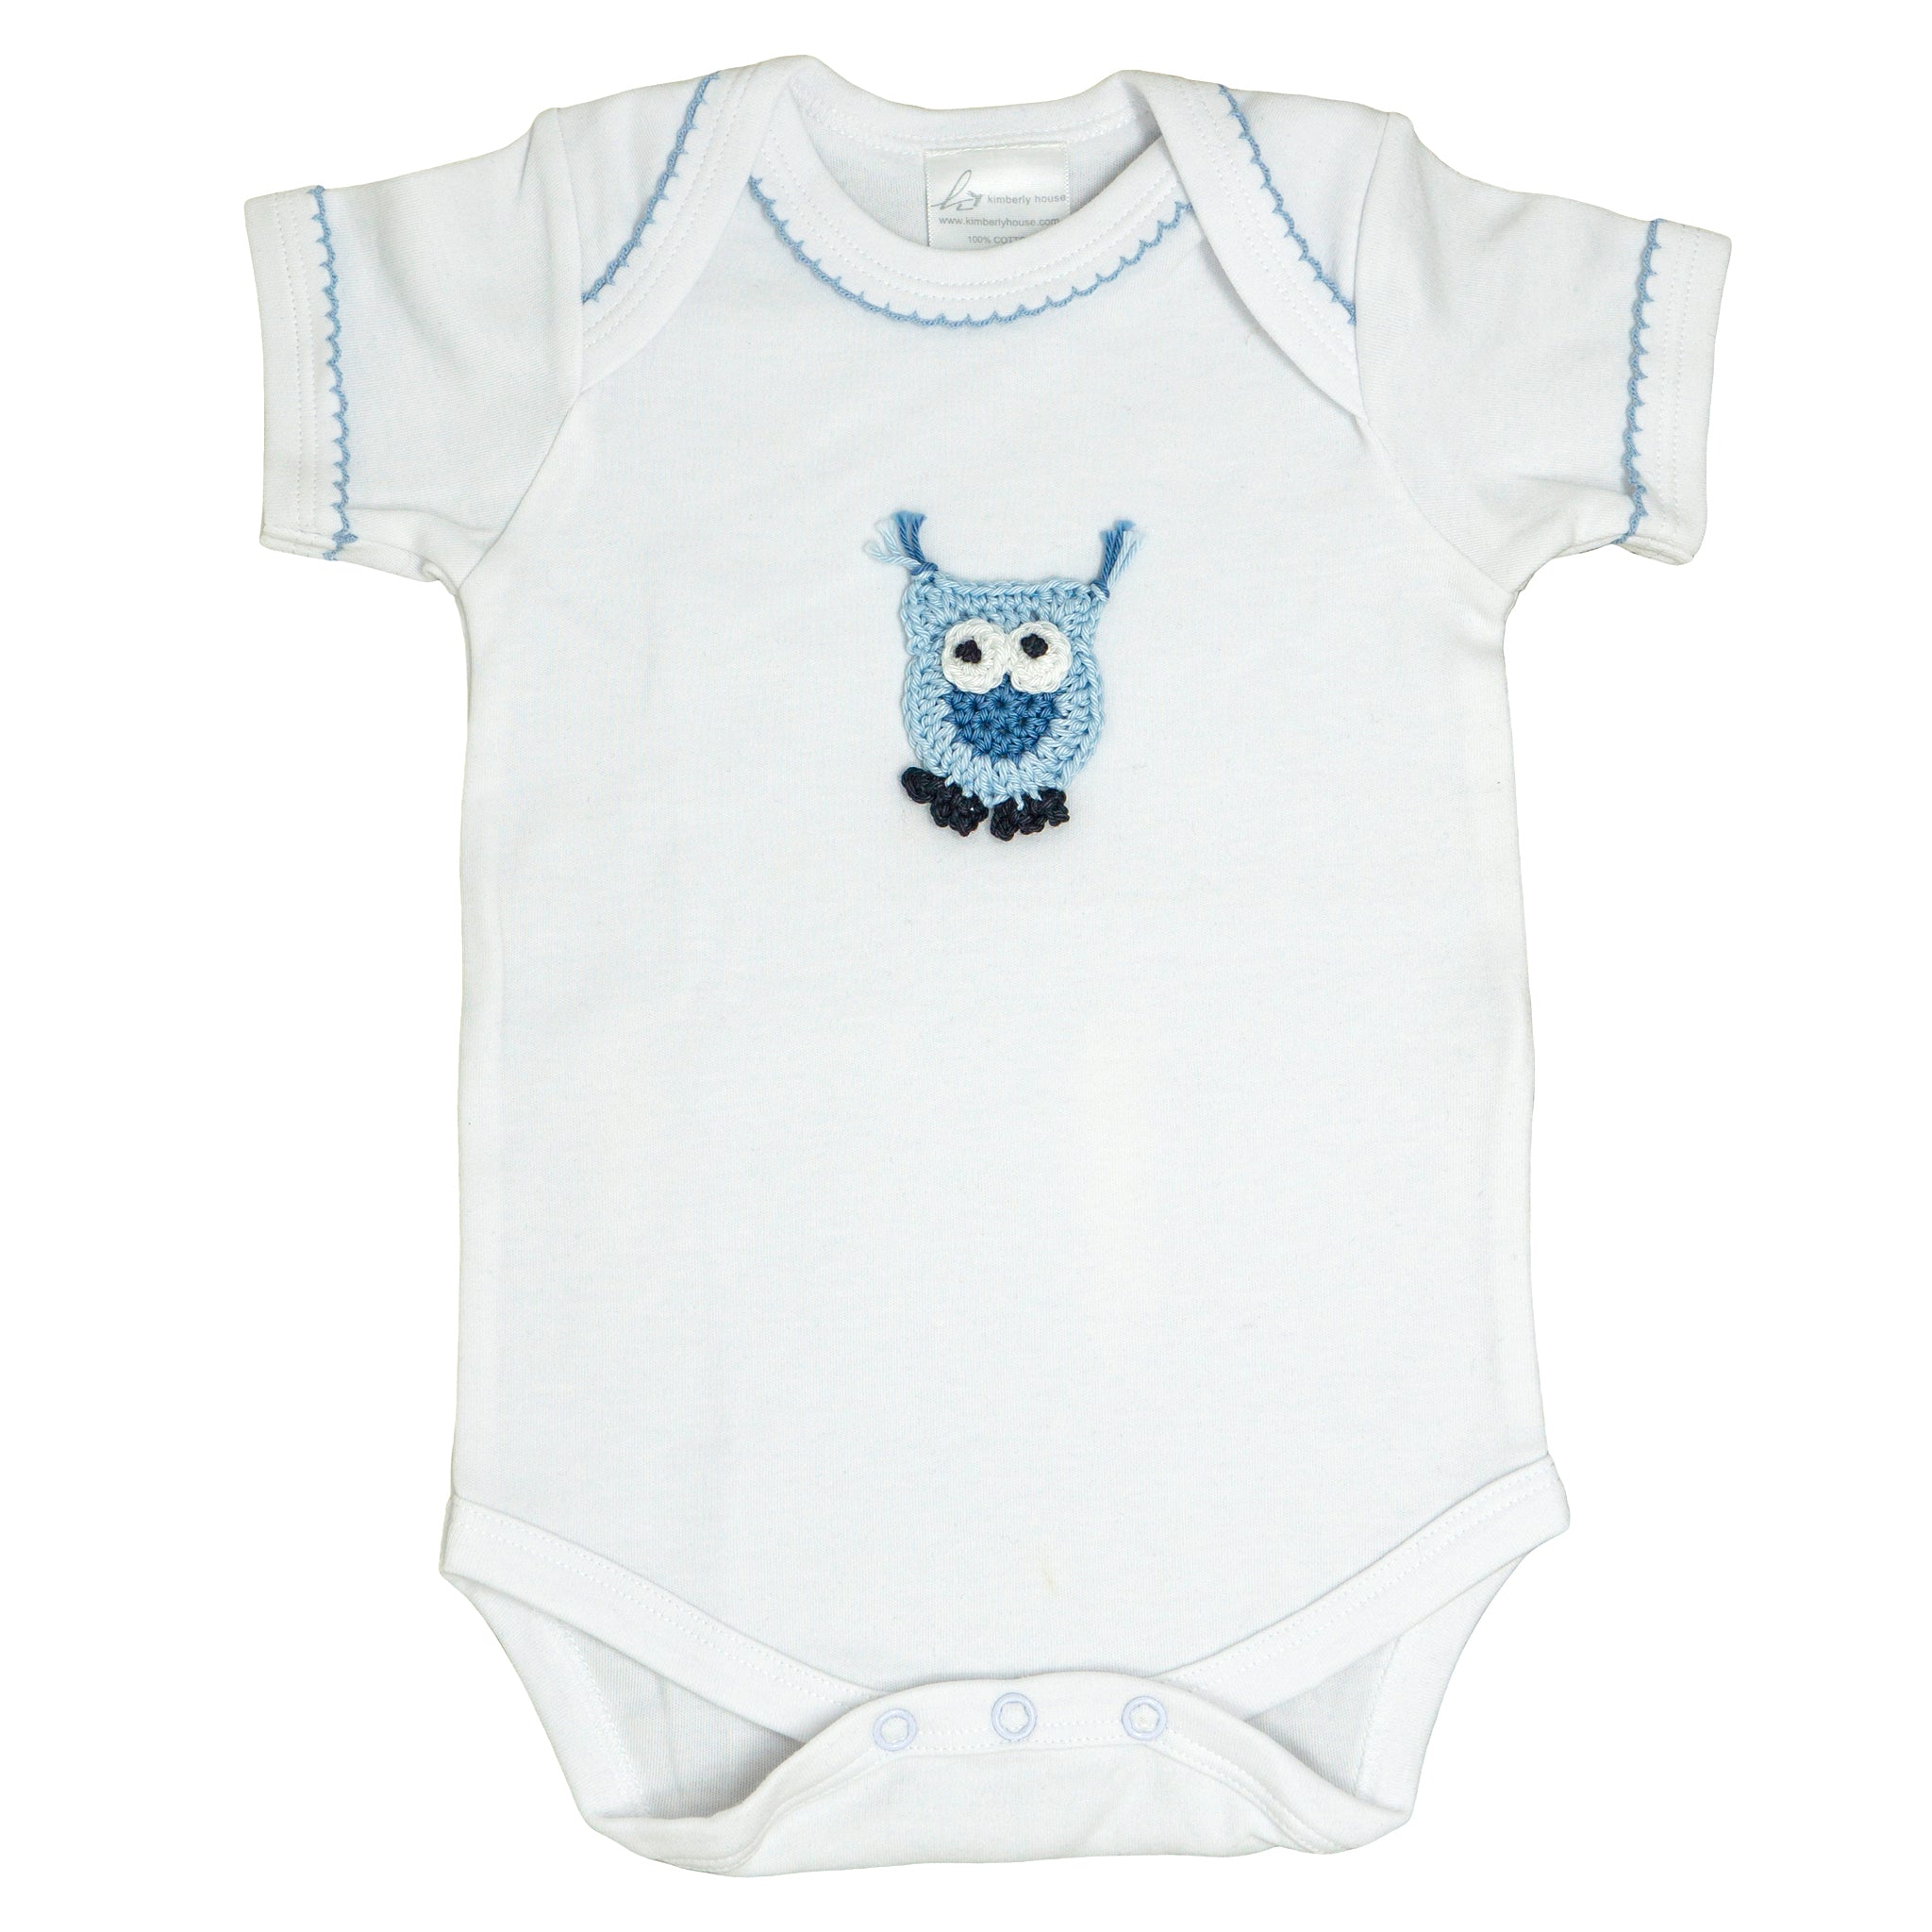 Short Body Onesie with Crocheted Blue Owl